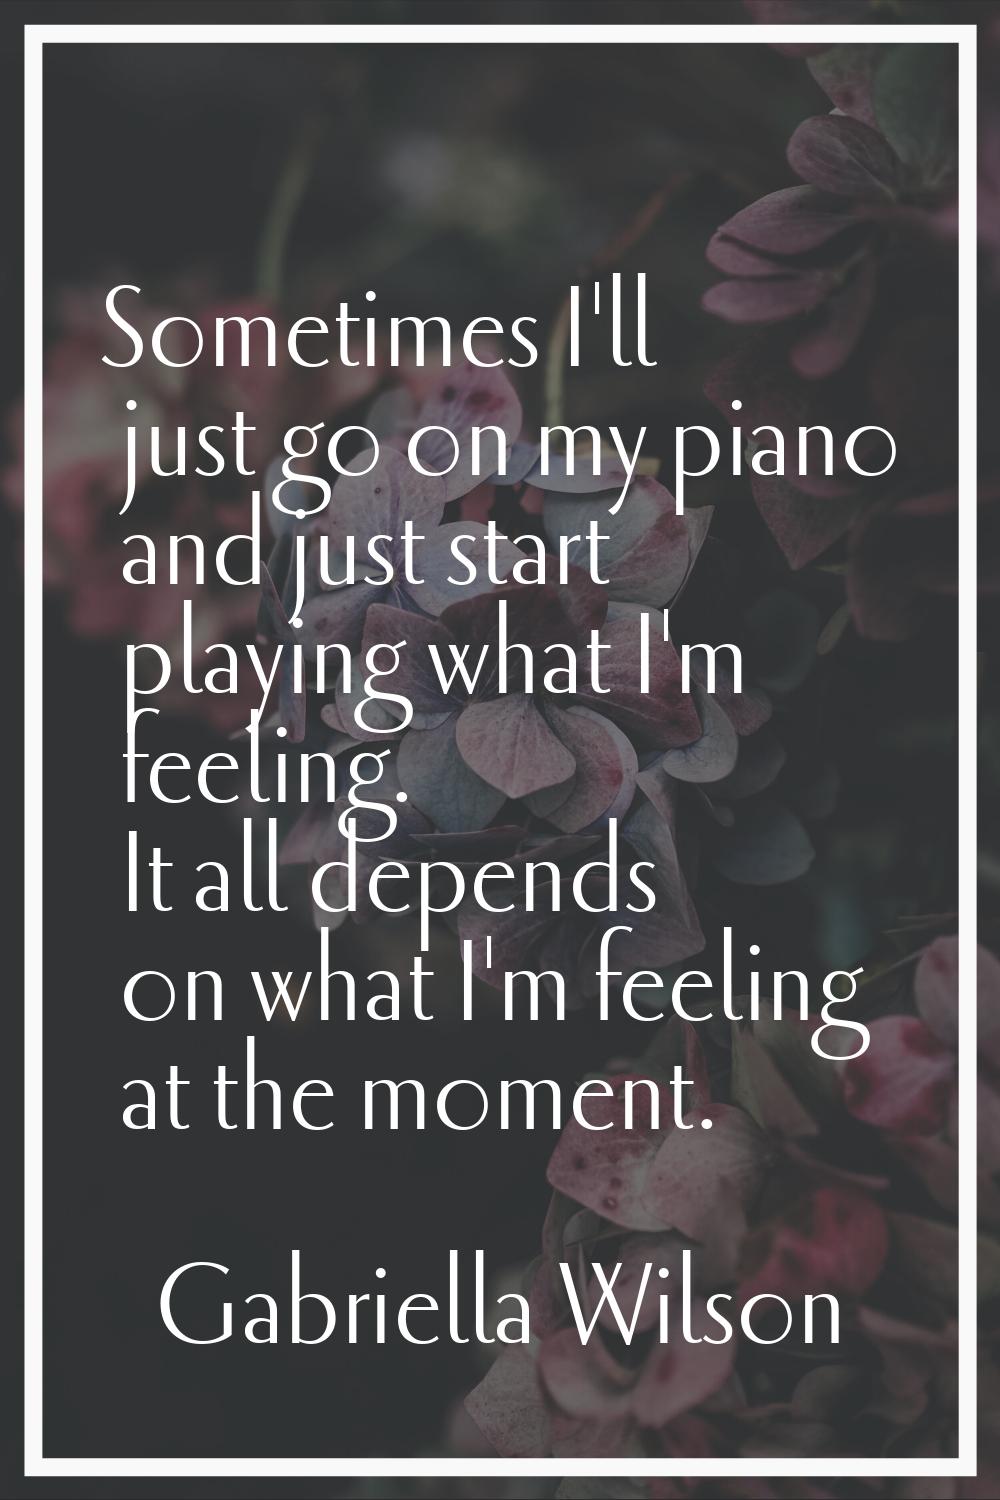 Sometimes I'll just go on my piano and just start playing what I'm feeling. It all depends on what 